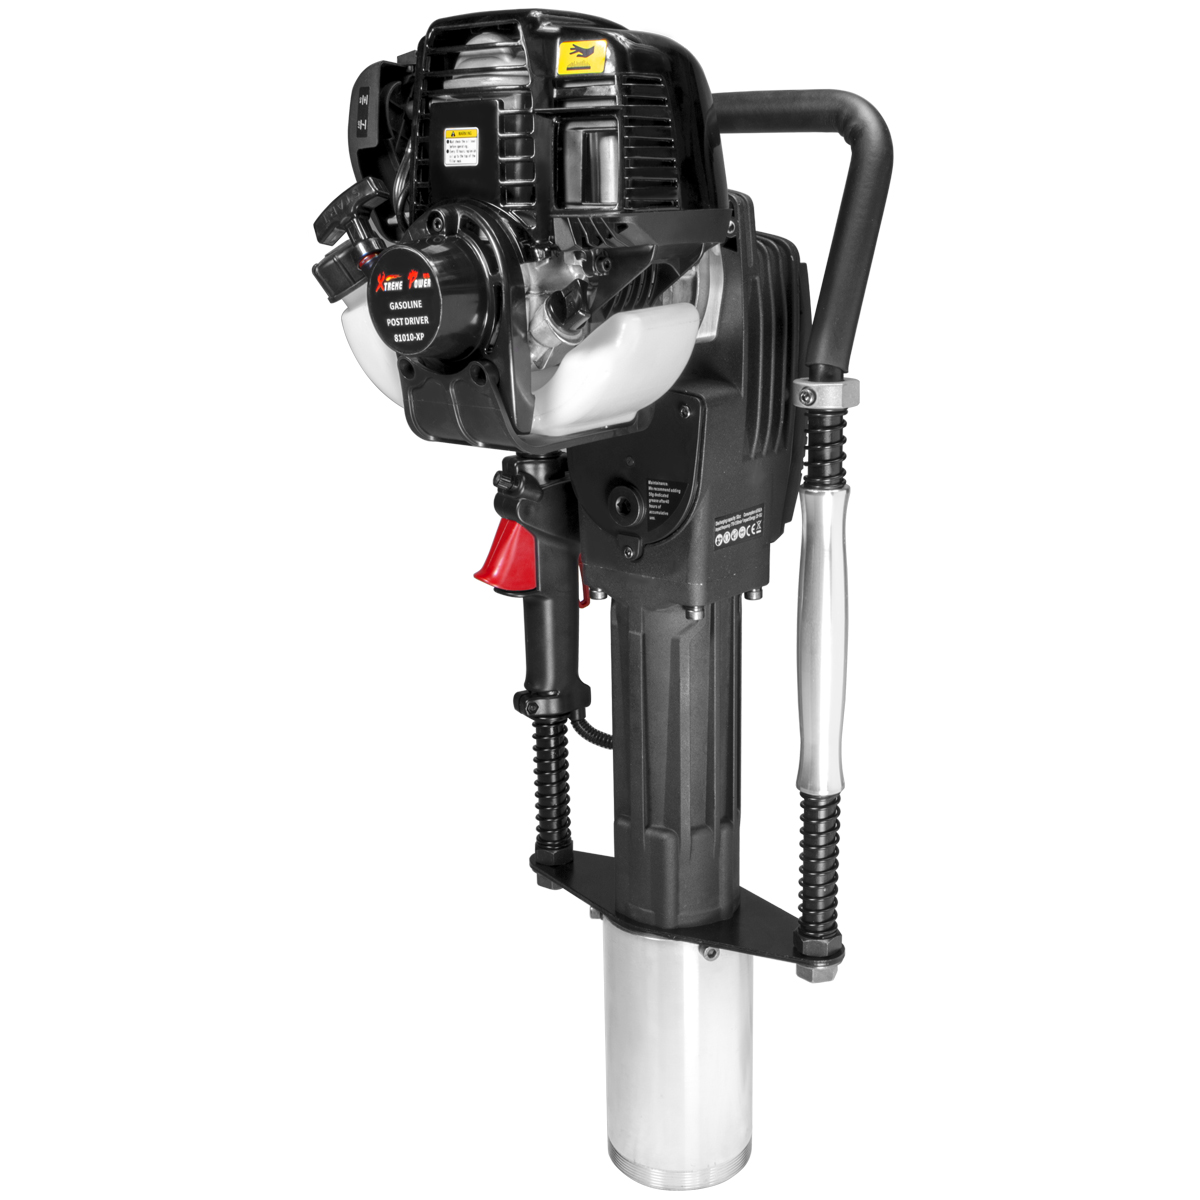 XtremepowerUS 38cc T-Post Driver Fence Post Driver Gas-Powered Piling Set 4-Stroke EPA Motor w/ Rolling Case - image 3 of 7